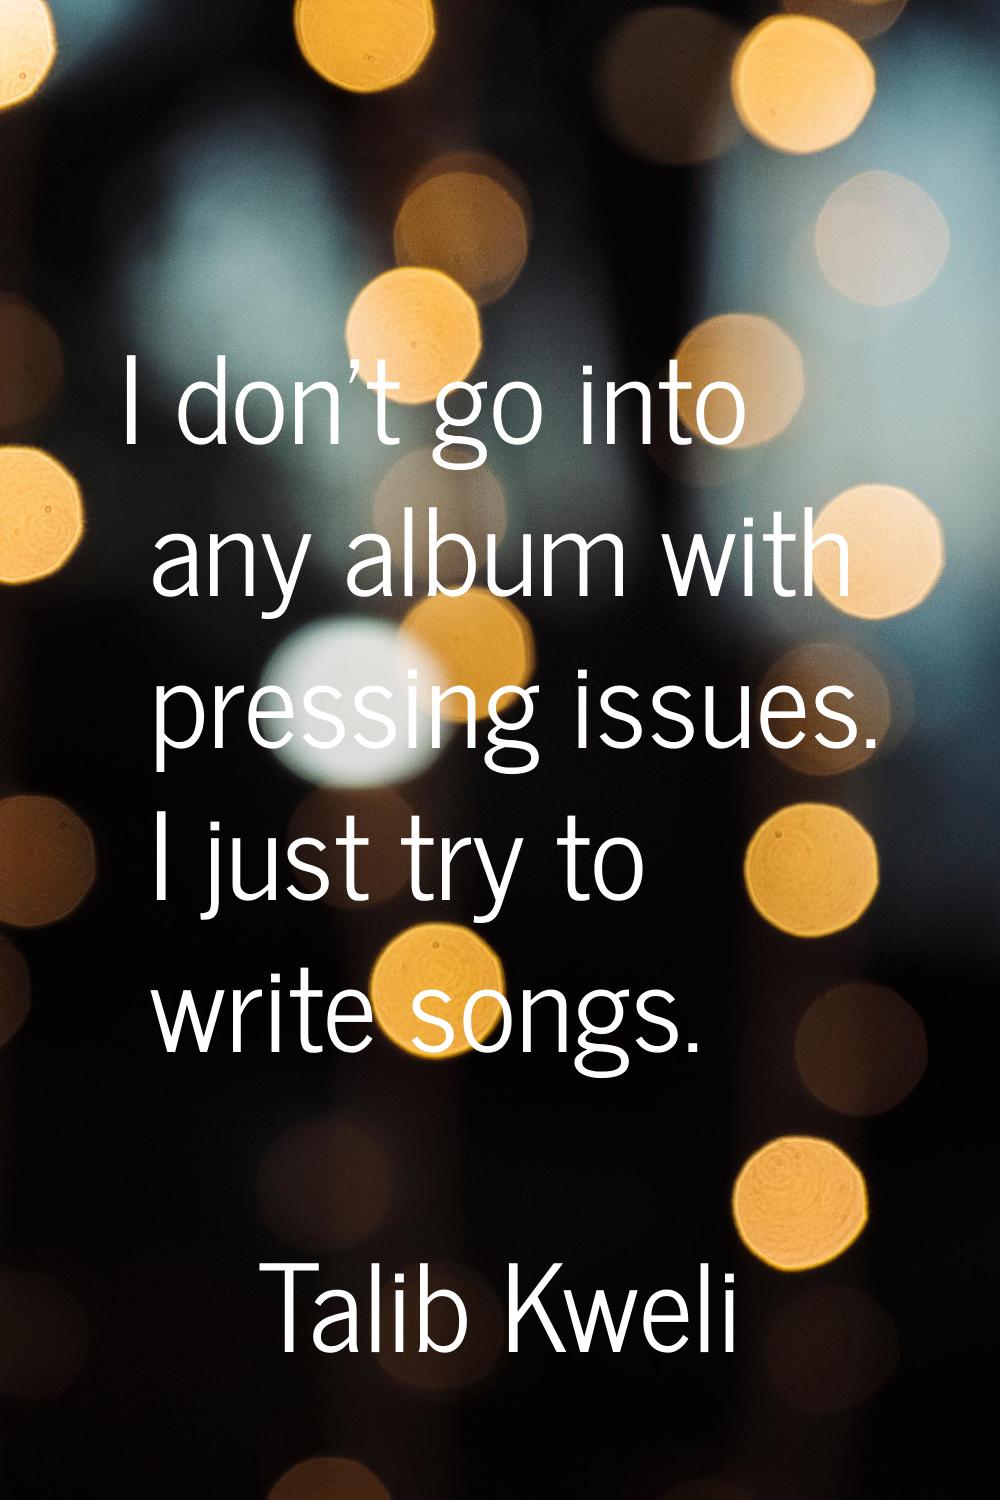 I don't go into any album with pressing issues. I just try to write songs.